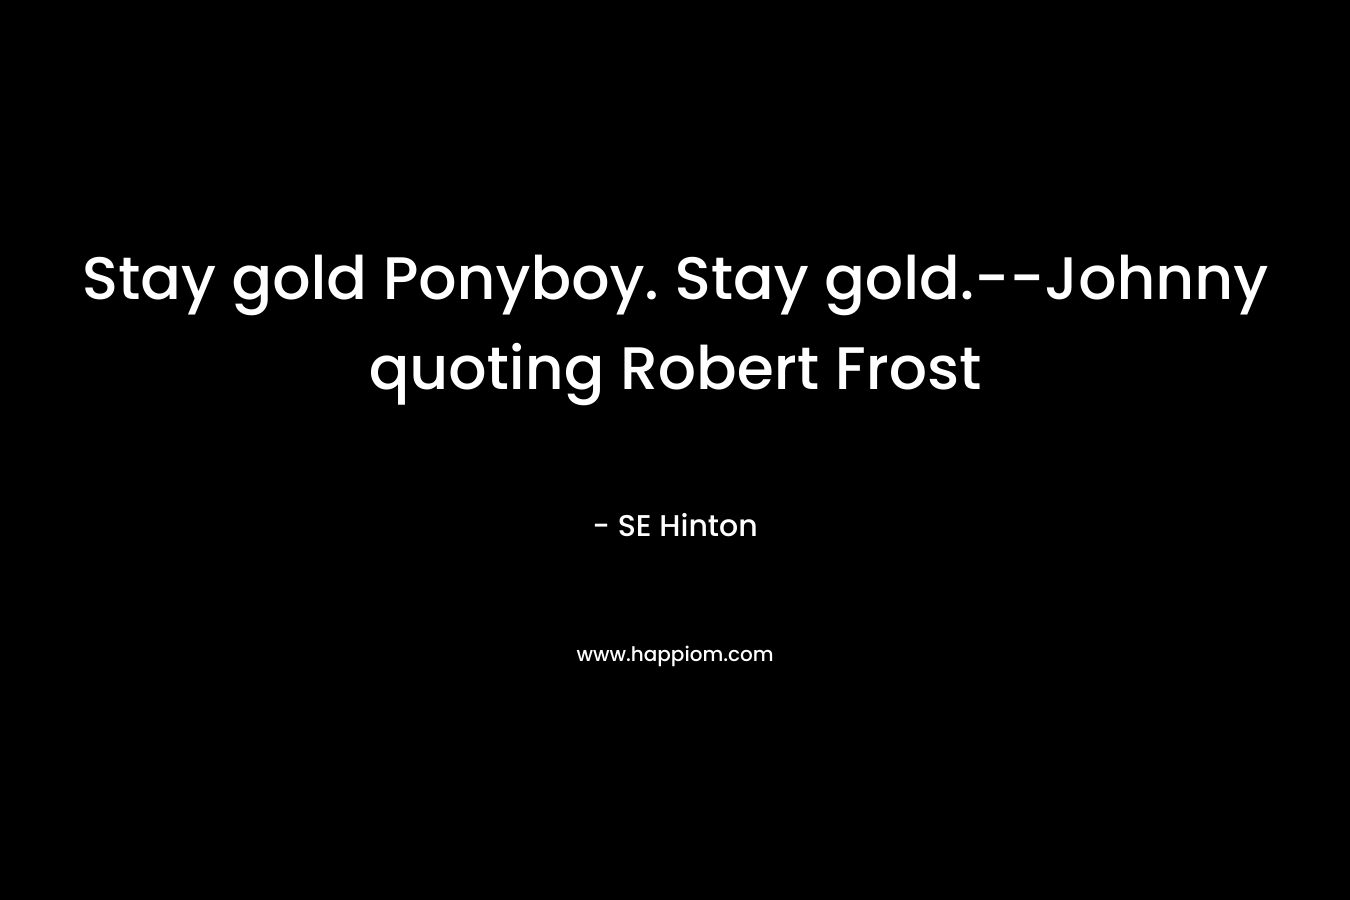 Stay gold Ponyboy. Stay gold.--Johnny quoting Robert Frost